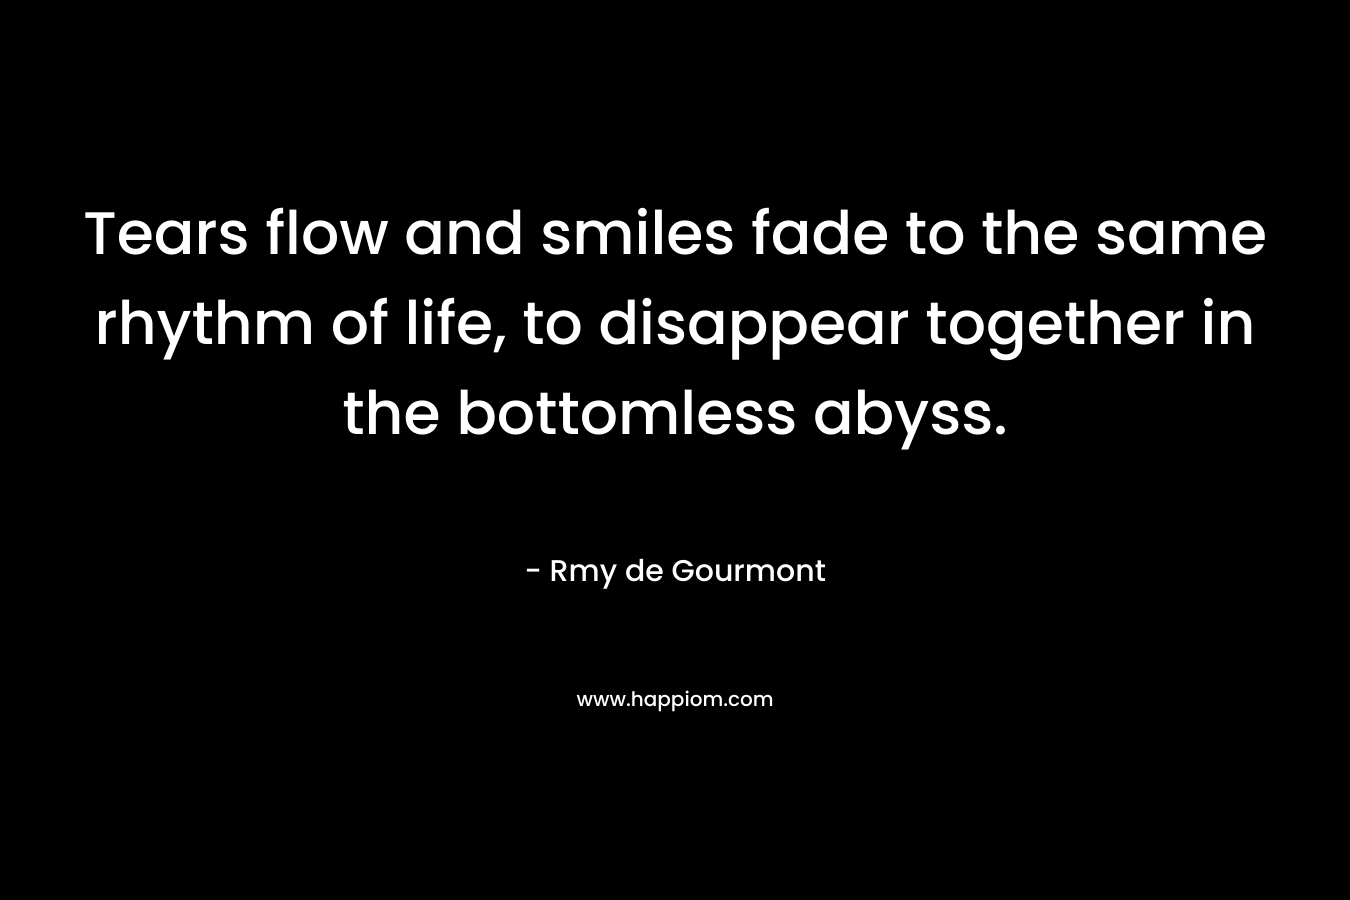 Tears flow and smiles fade to the same rhythm of life, to disappear together in the bottomless abyss. – Rmy de Gourmont